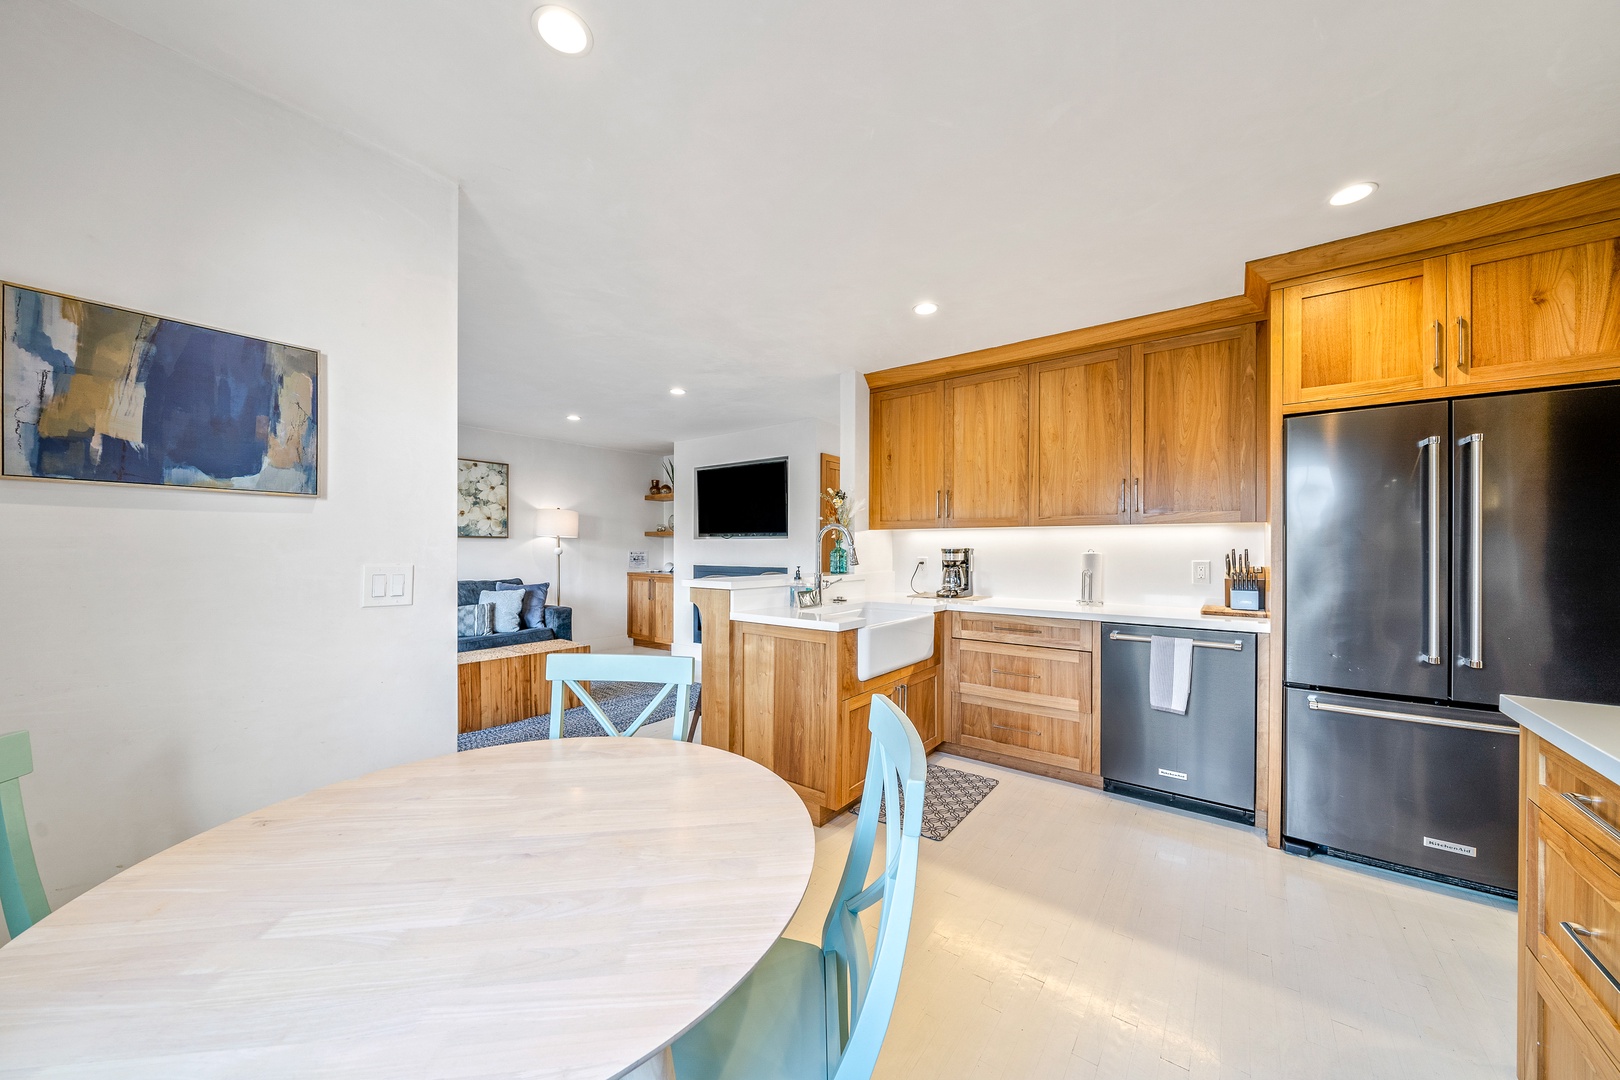 The serene, eat-in kitchen is spacious & offers all the comforts of home